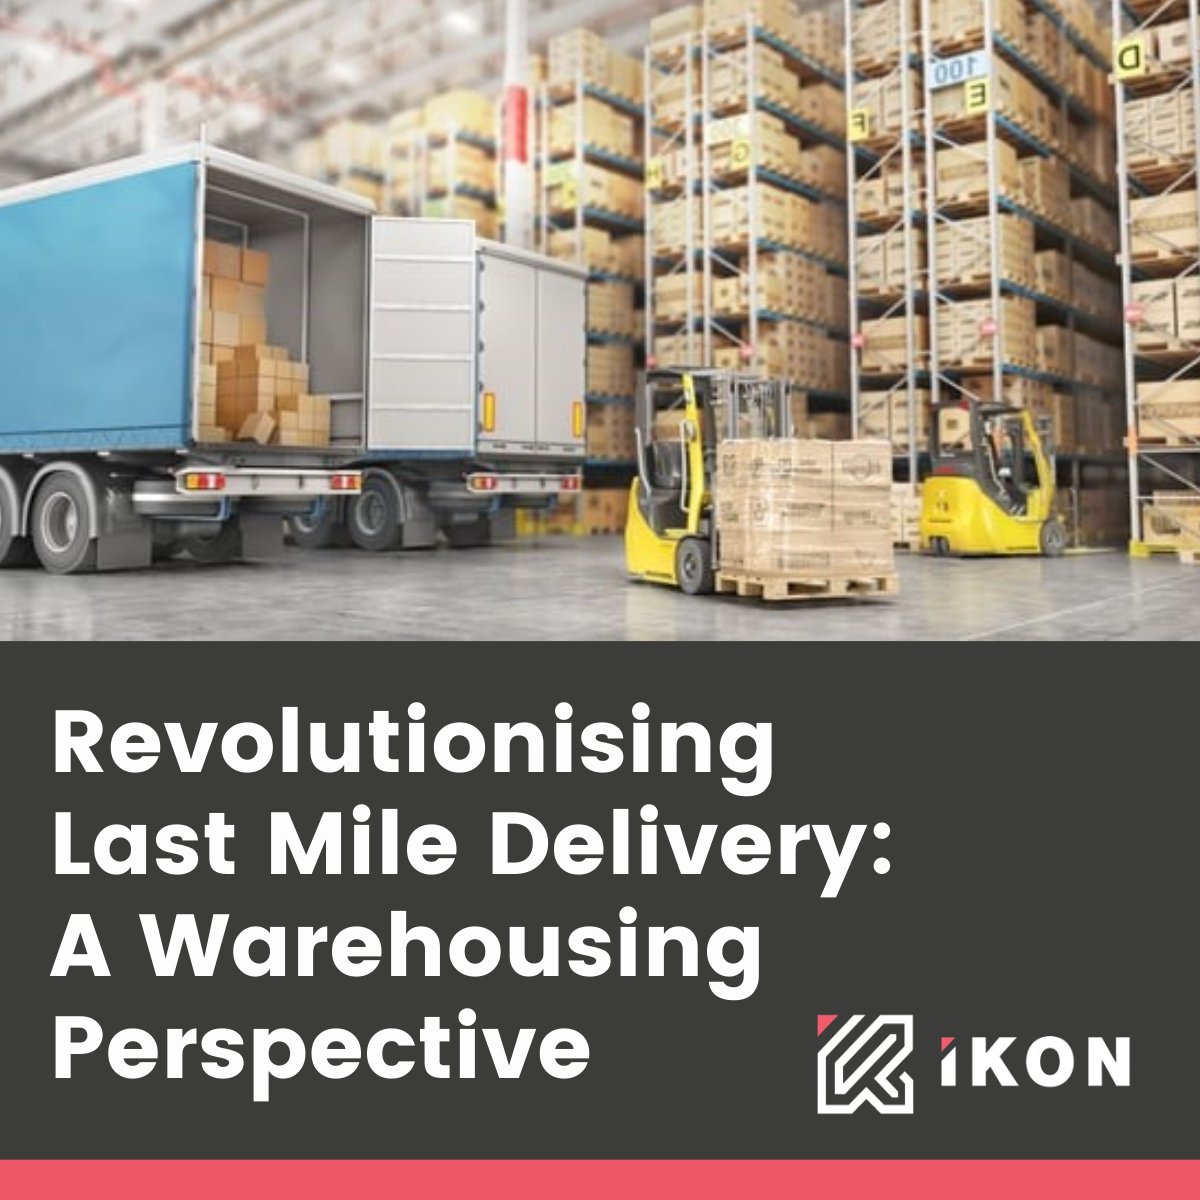 REVOLUTIONISING LAST MILE DELIVERY: A WAREHOUSING PERSPECTIVE